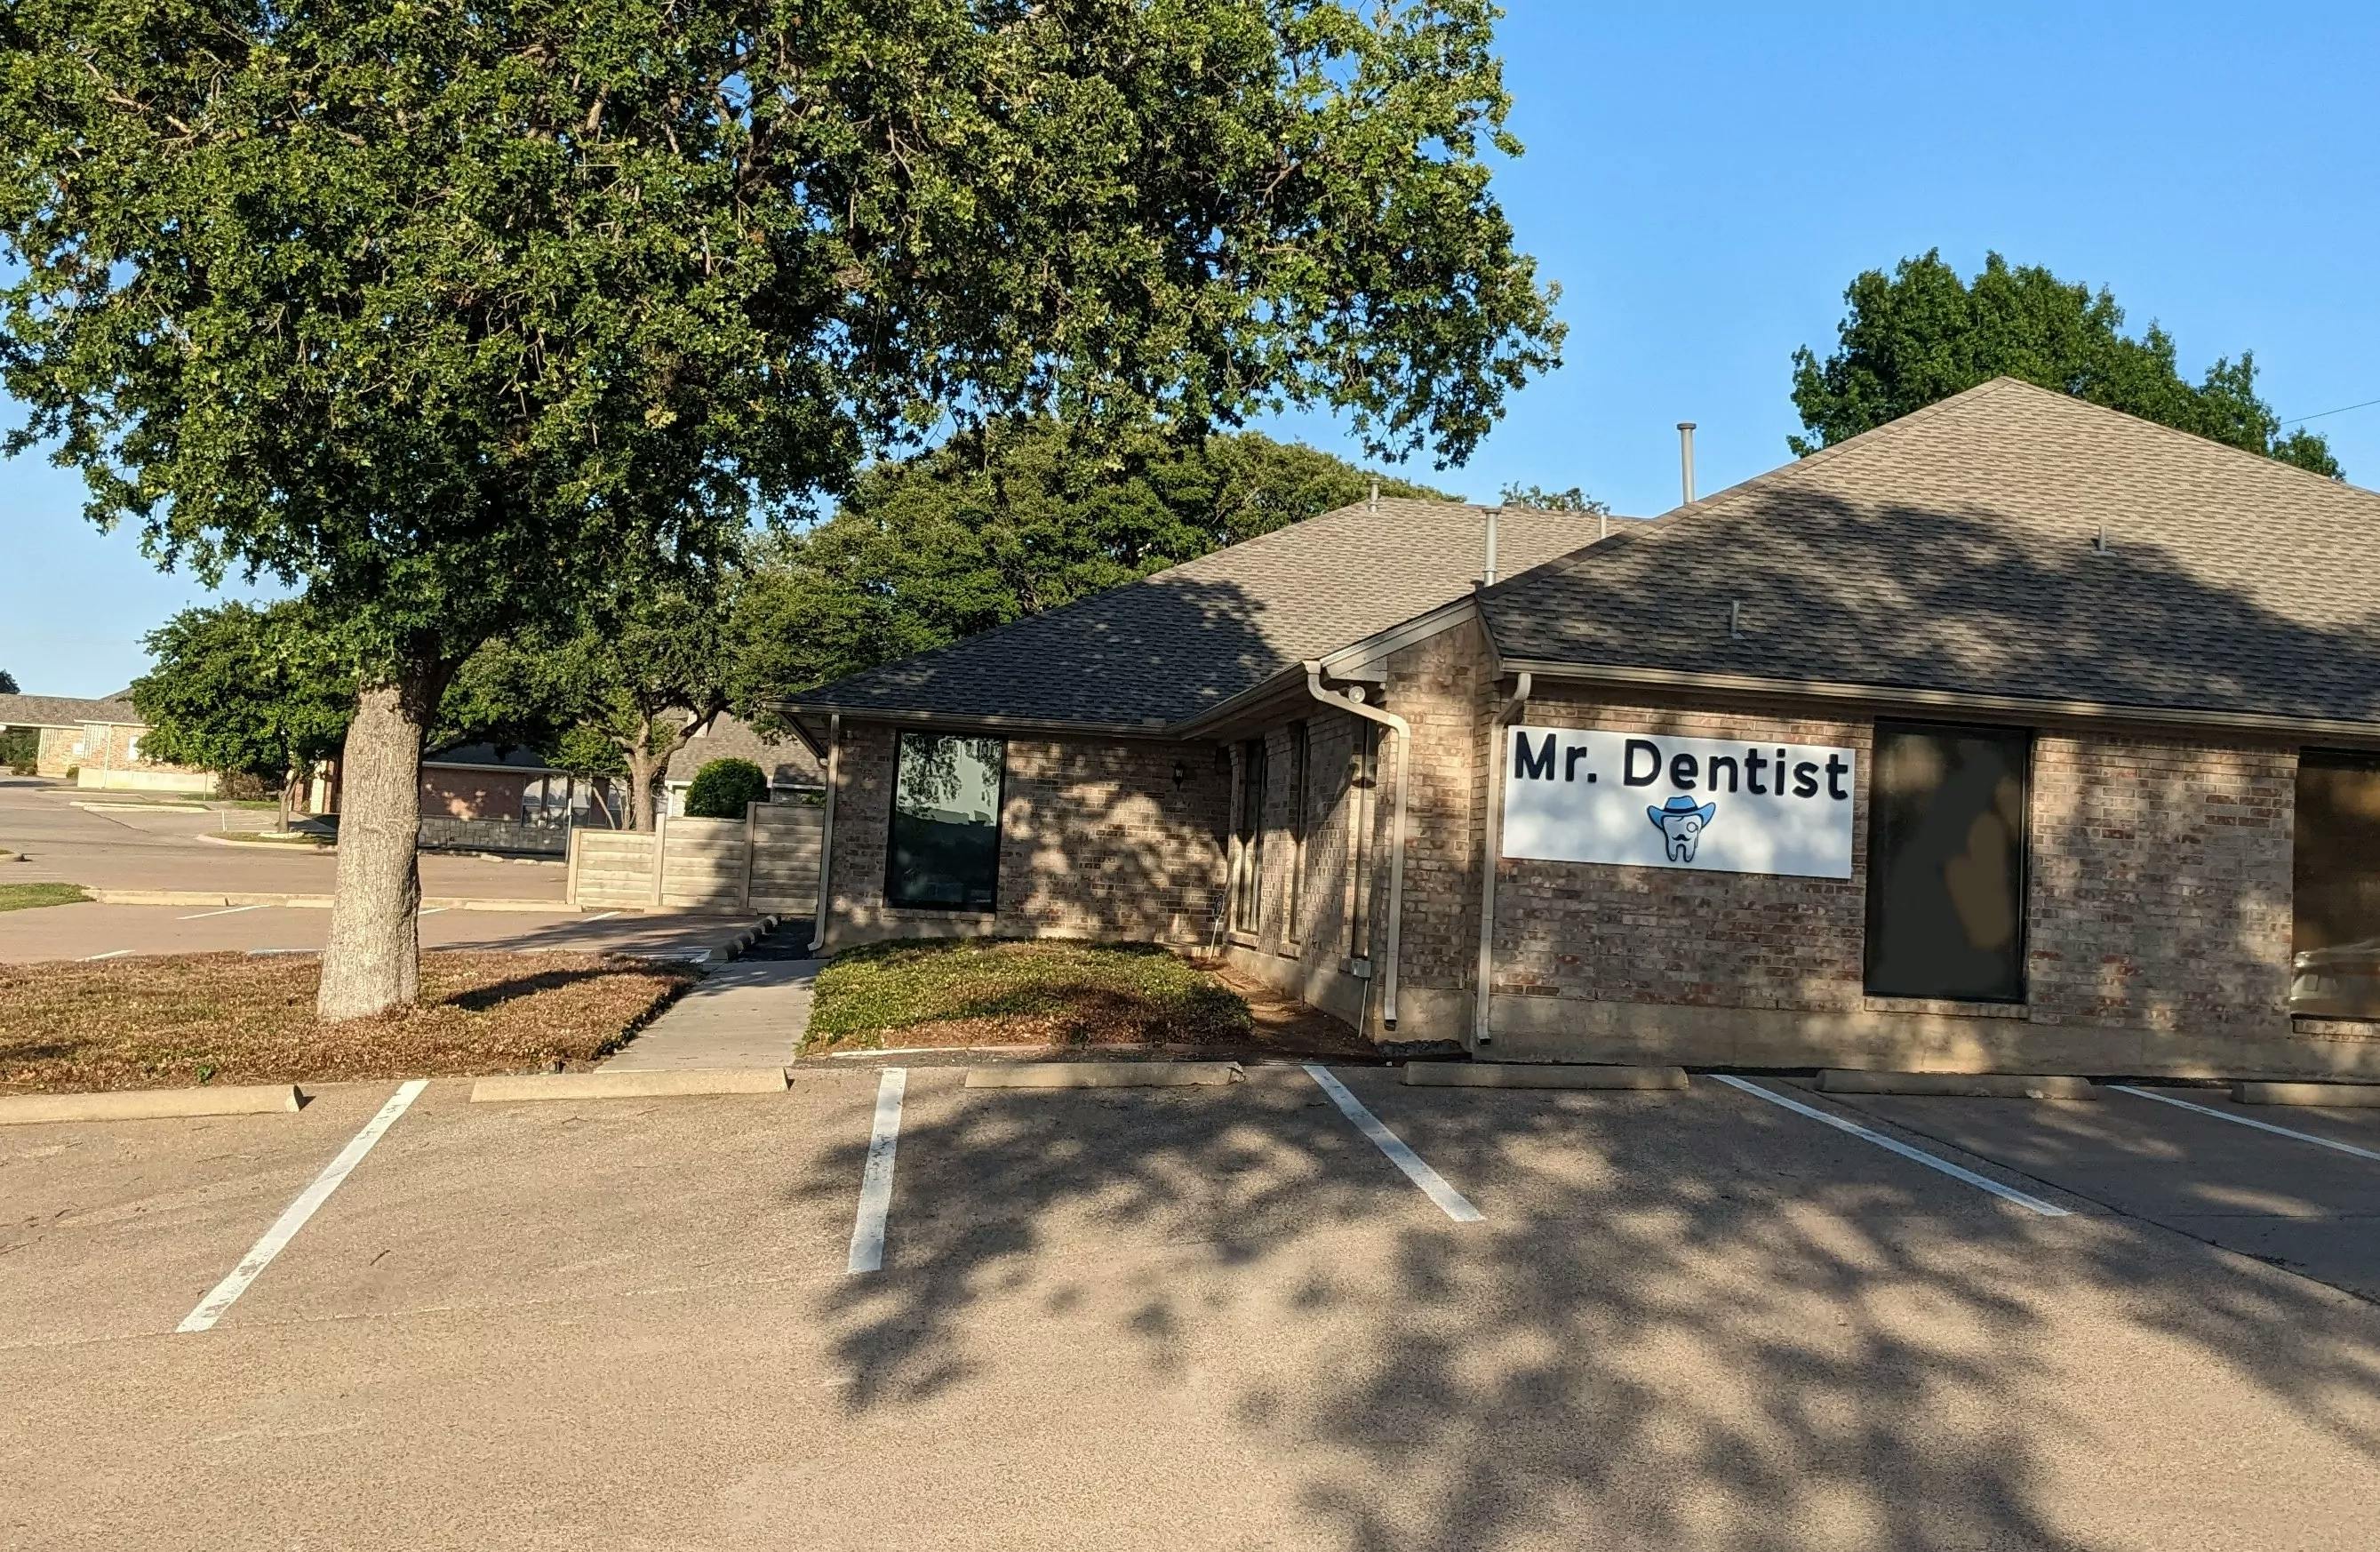 View of the Mr. Dentist dental office from outside